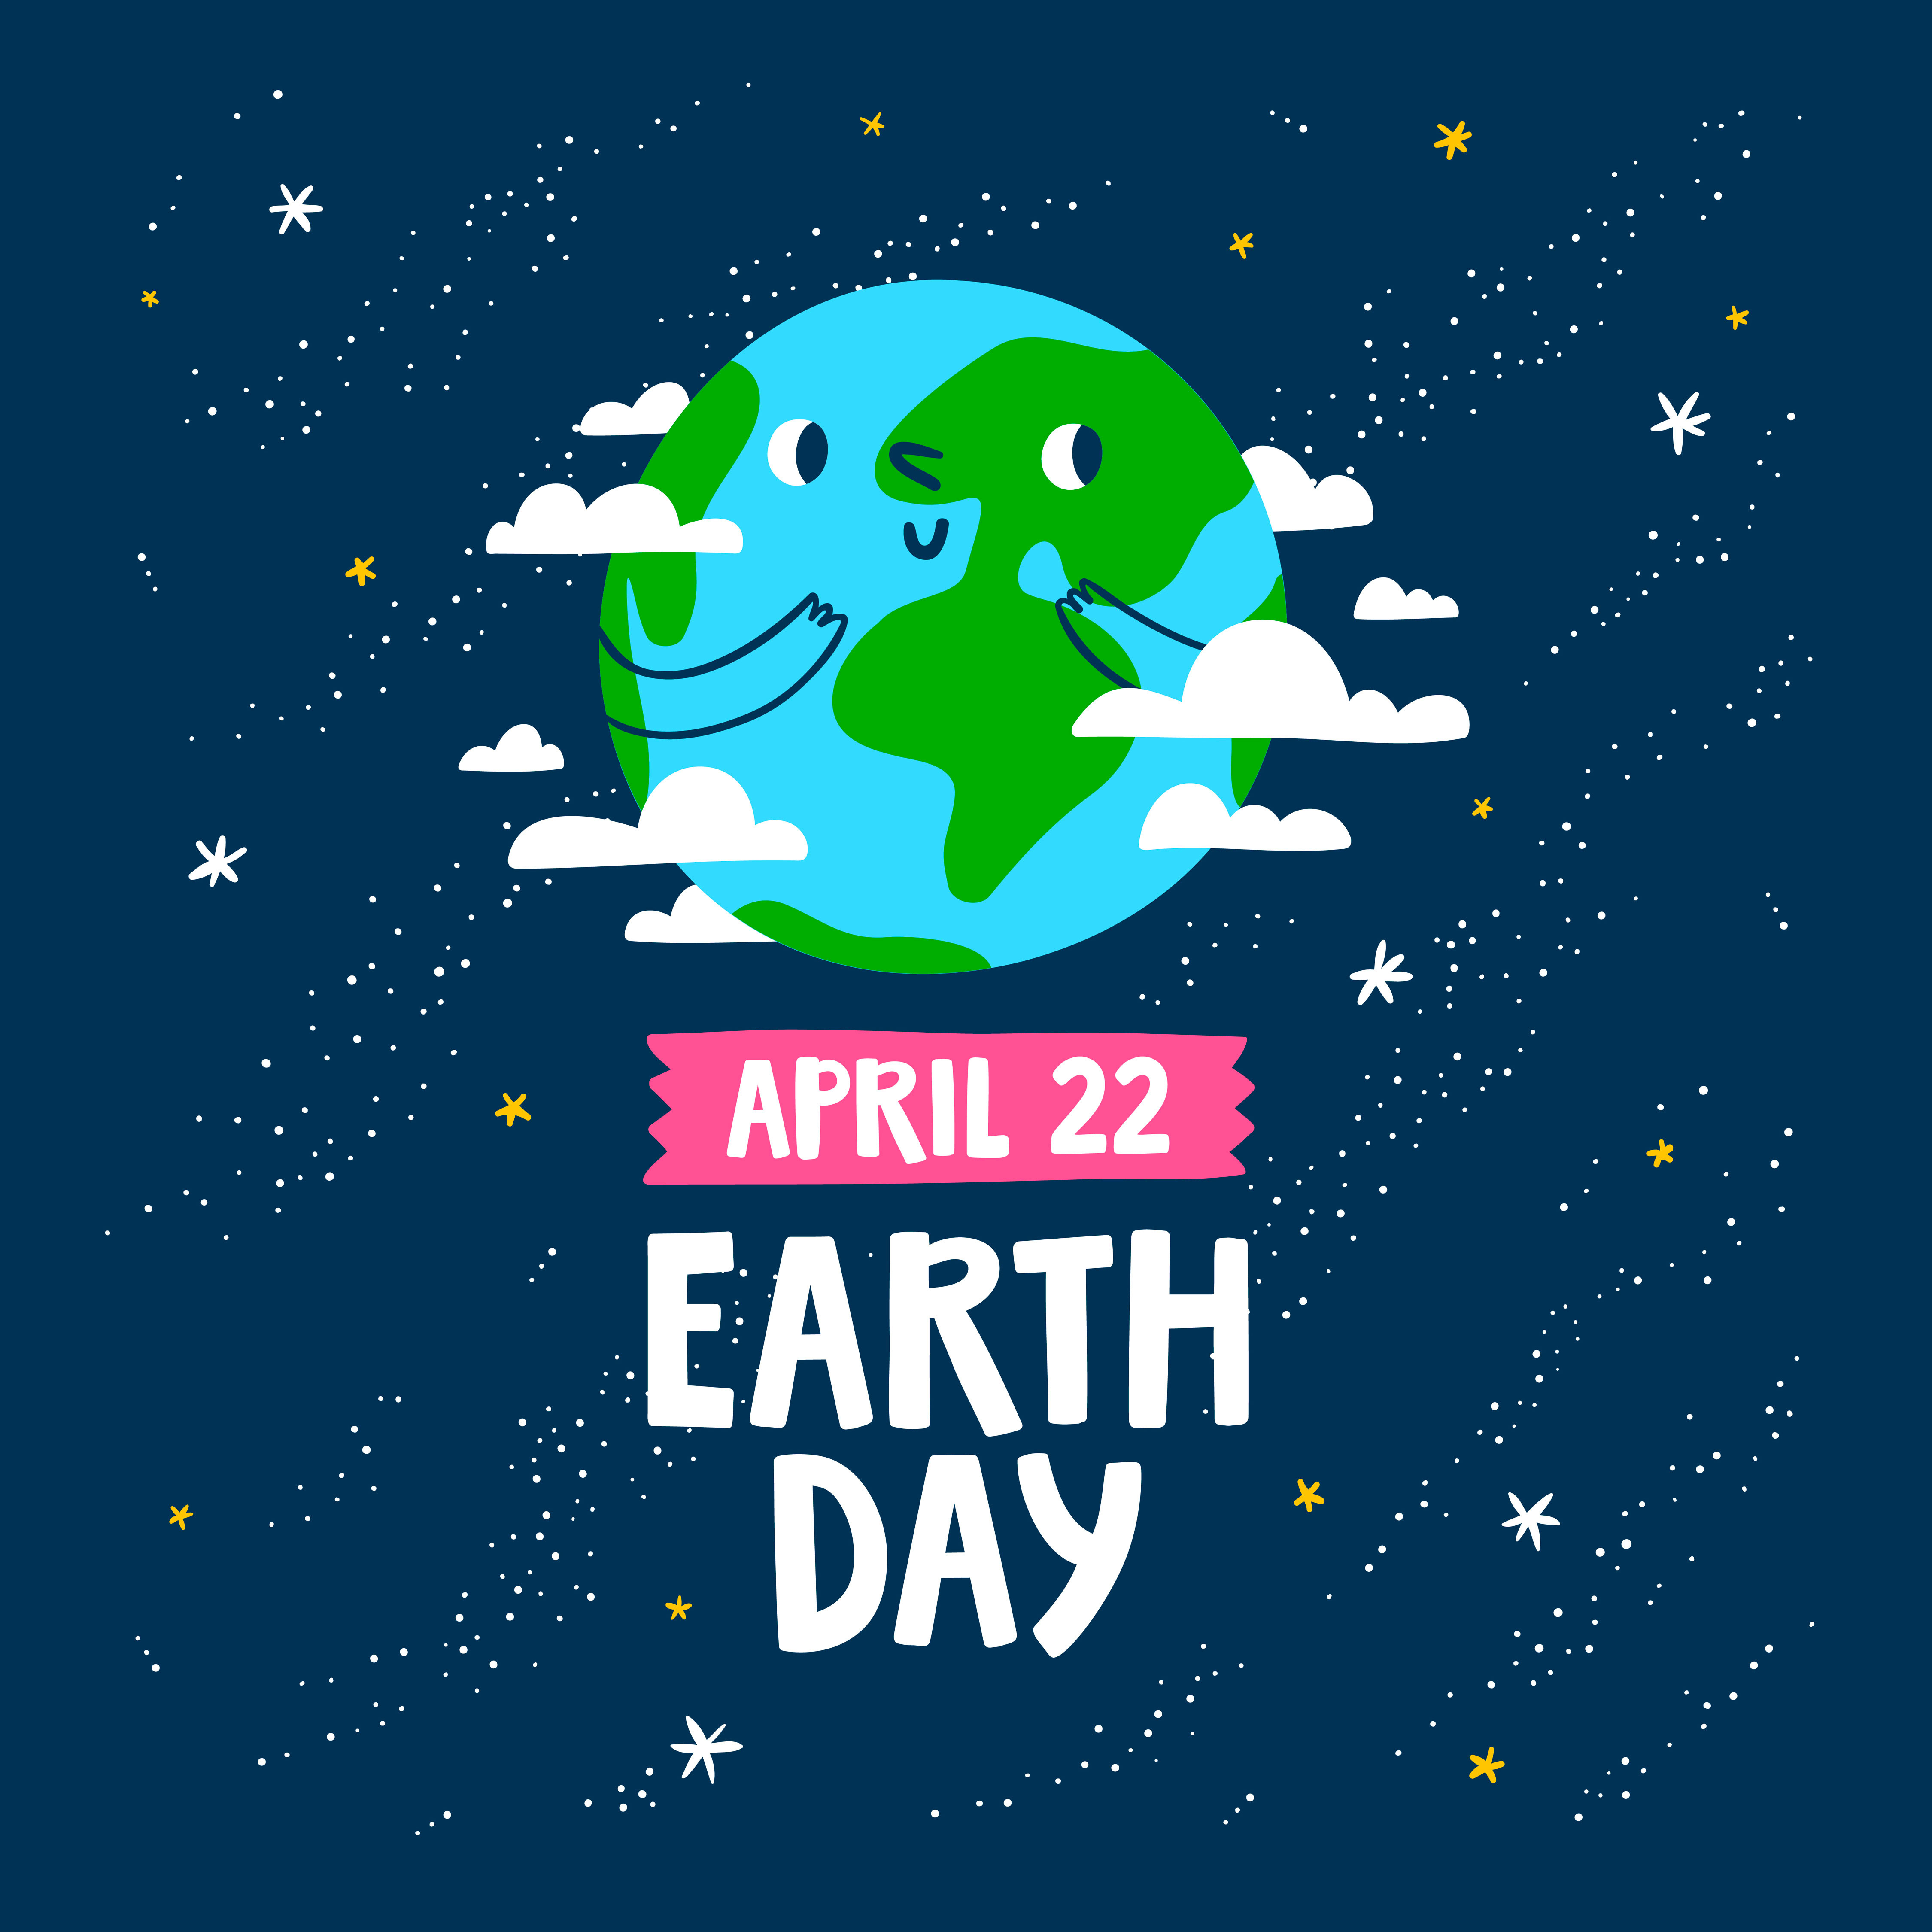 Smiling Earth, Earth Day April 22